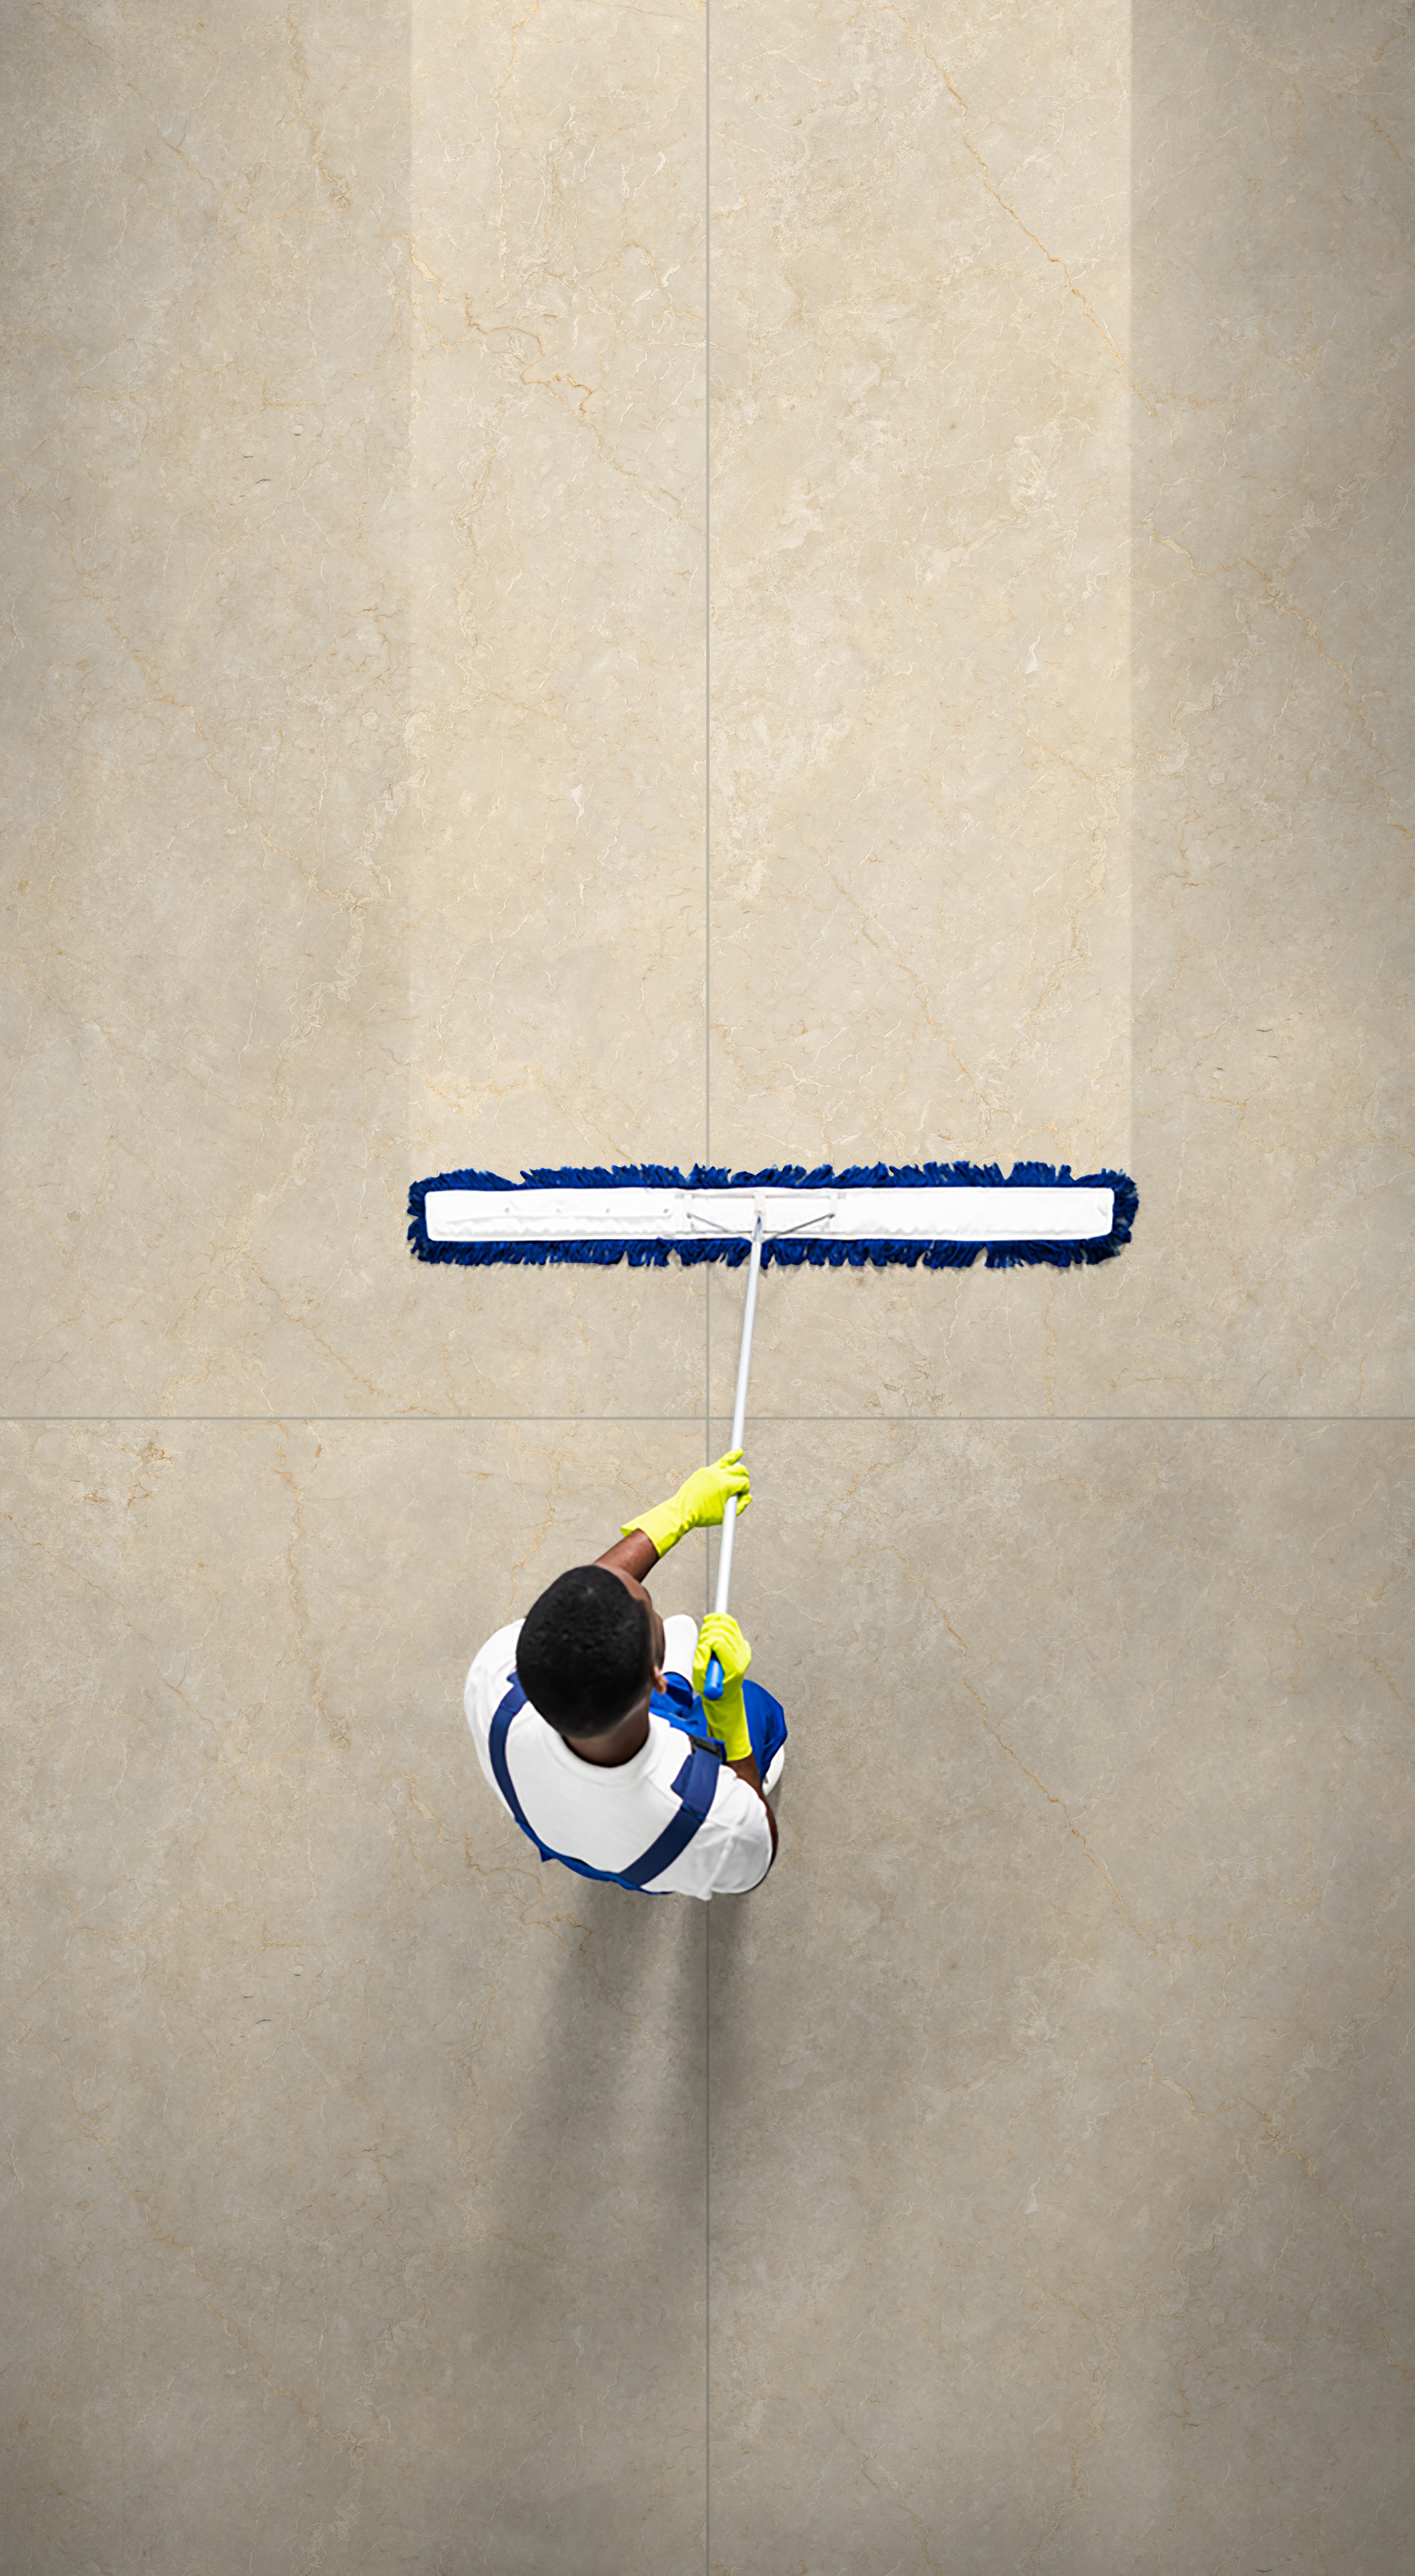 How To Clean Grout: 7 Efficient Ways To Renew Old Grout As New